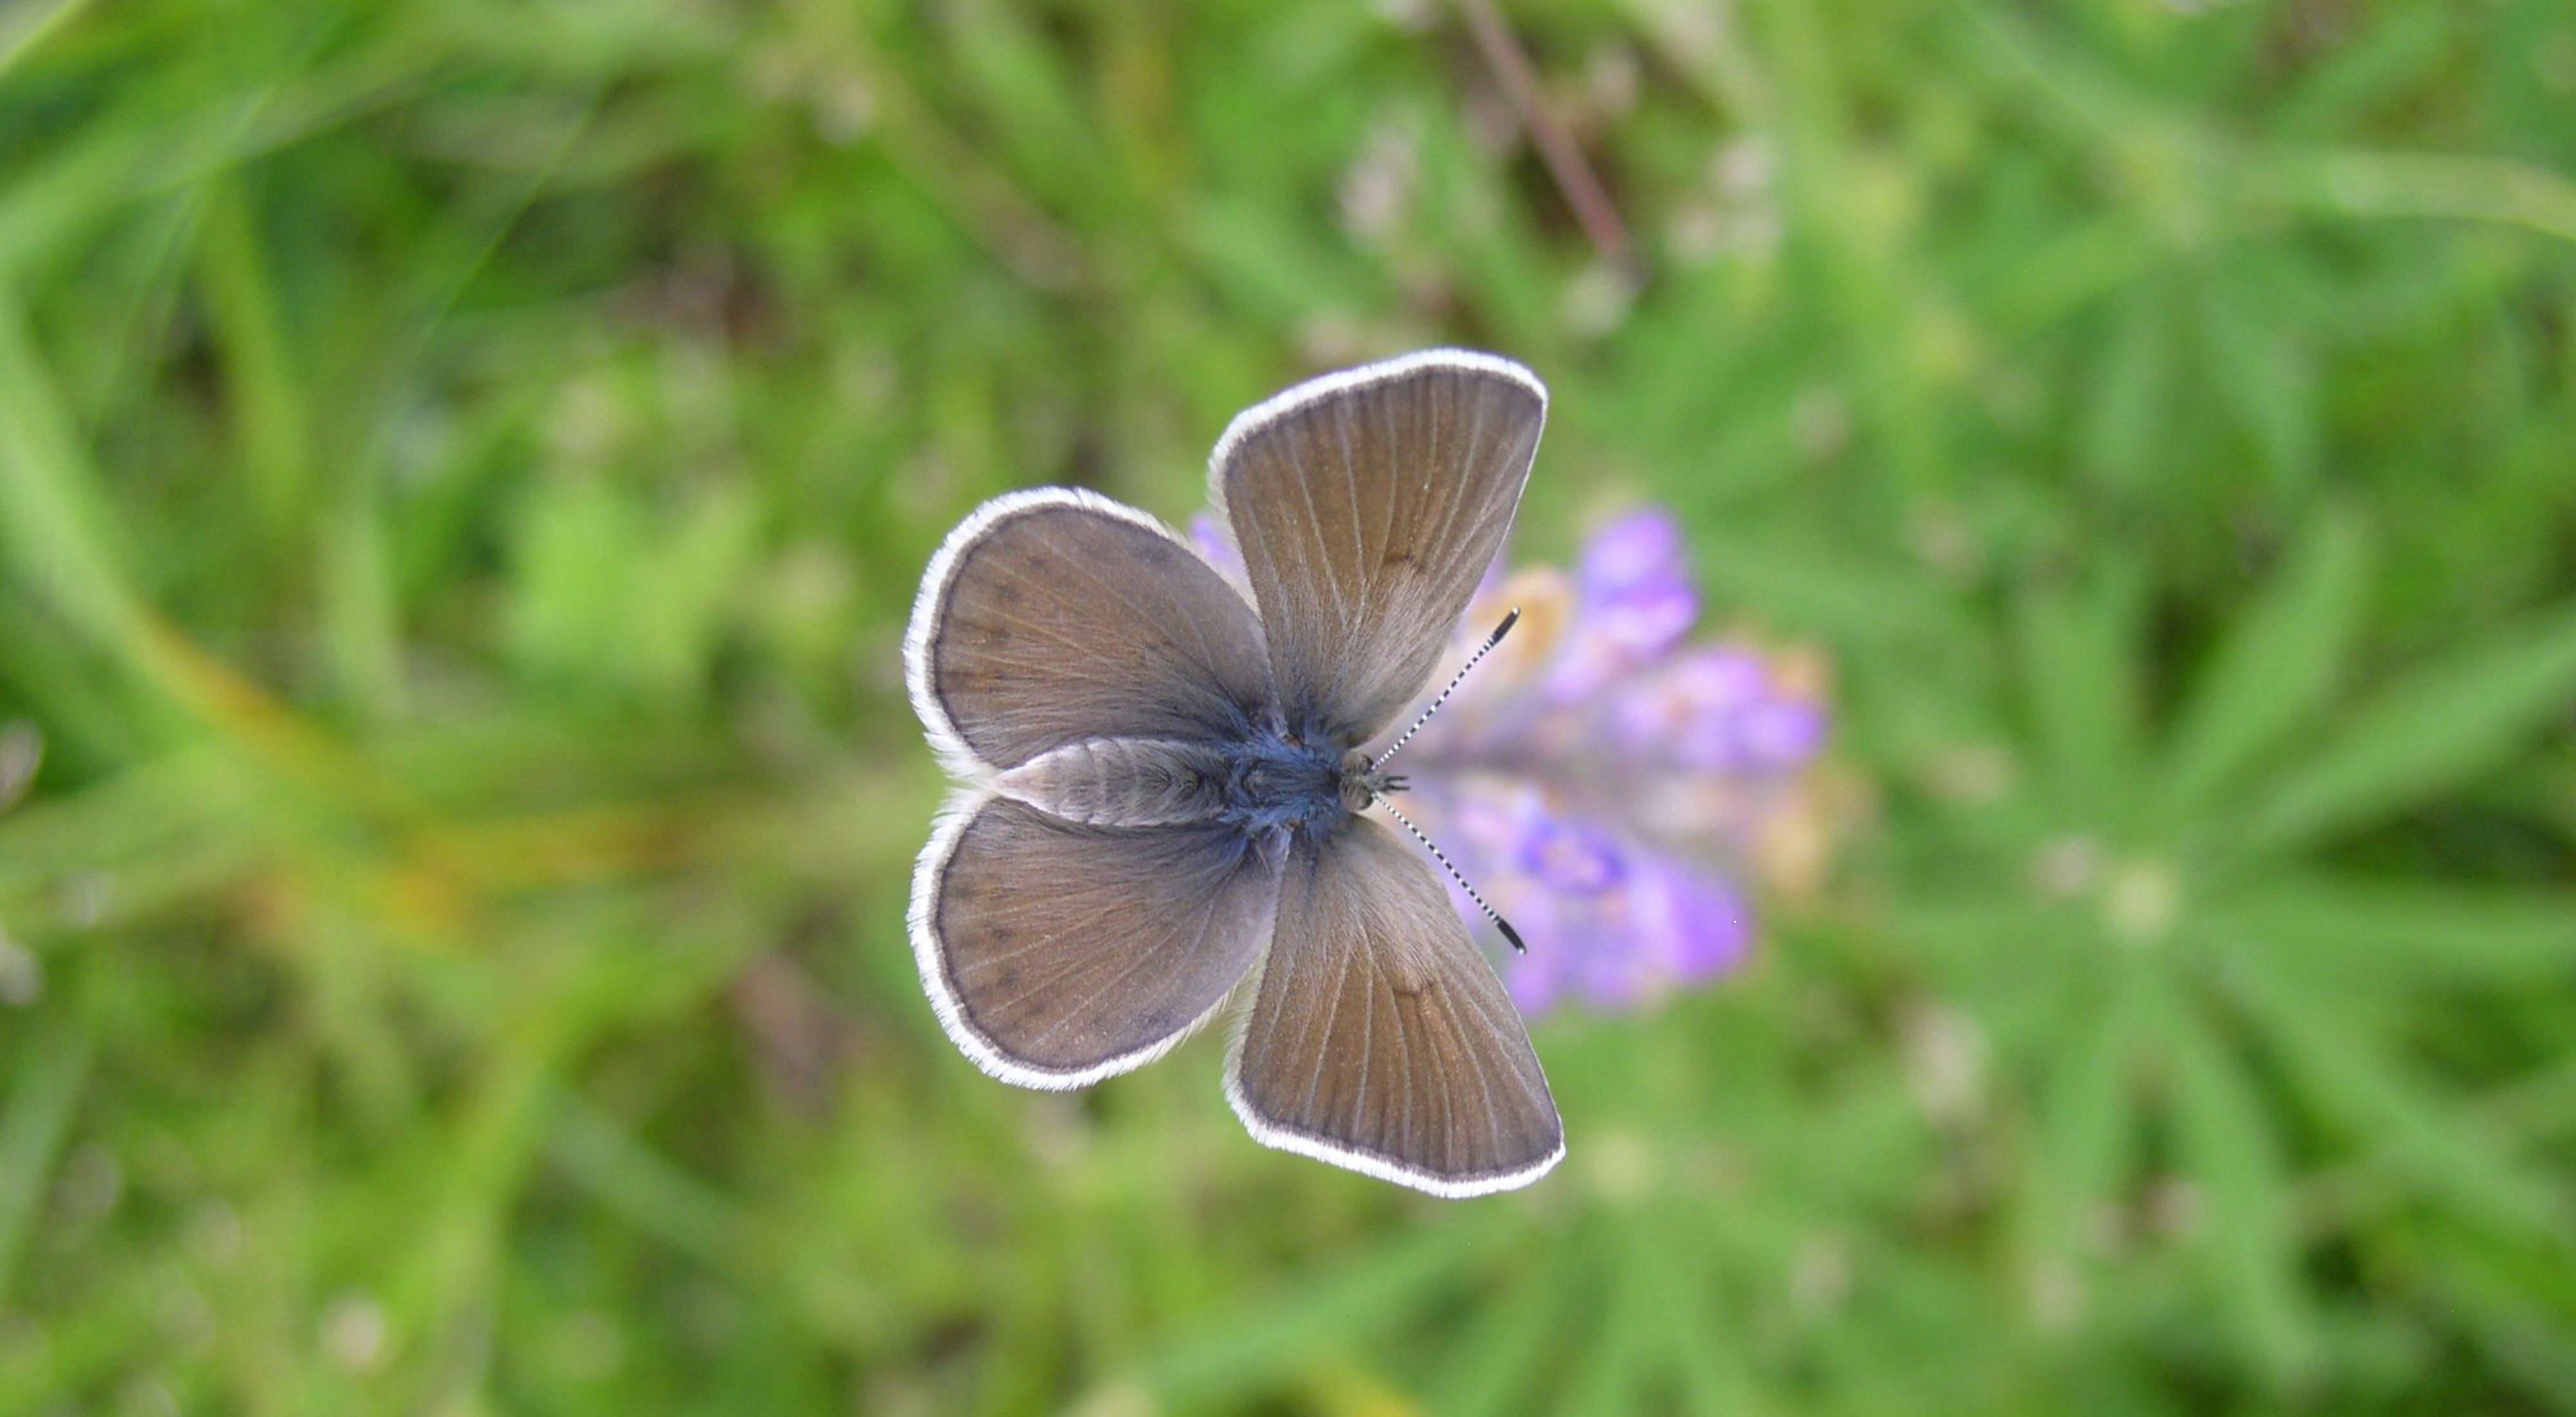 A Fender's Blue butterfly perched on a Kincaid's Lupine flower